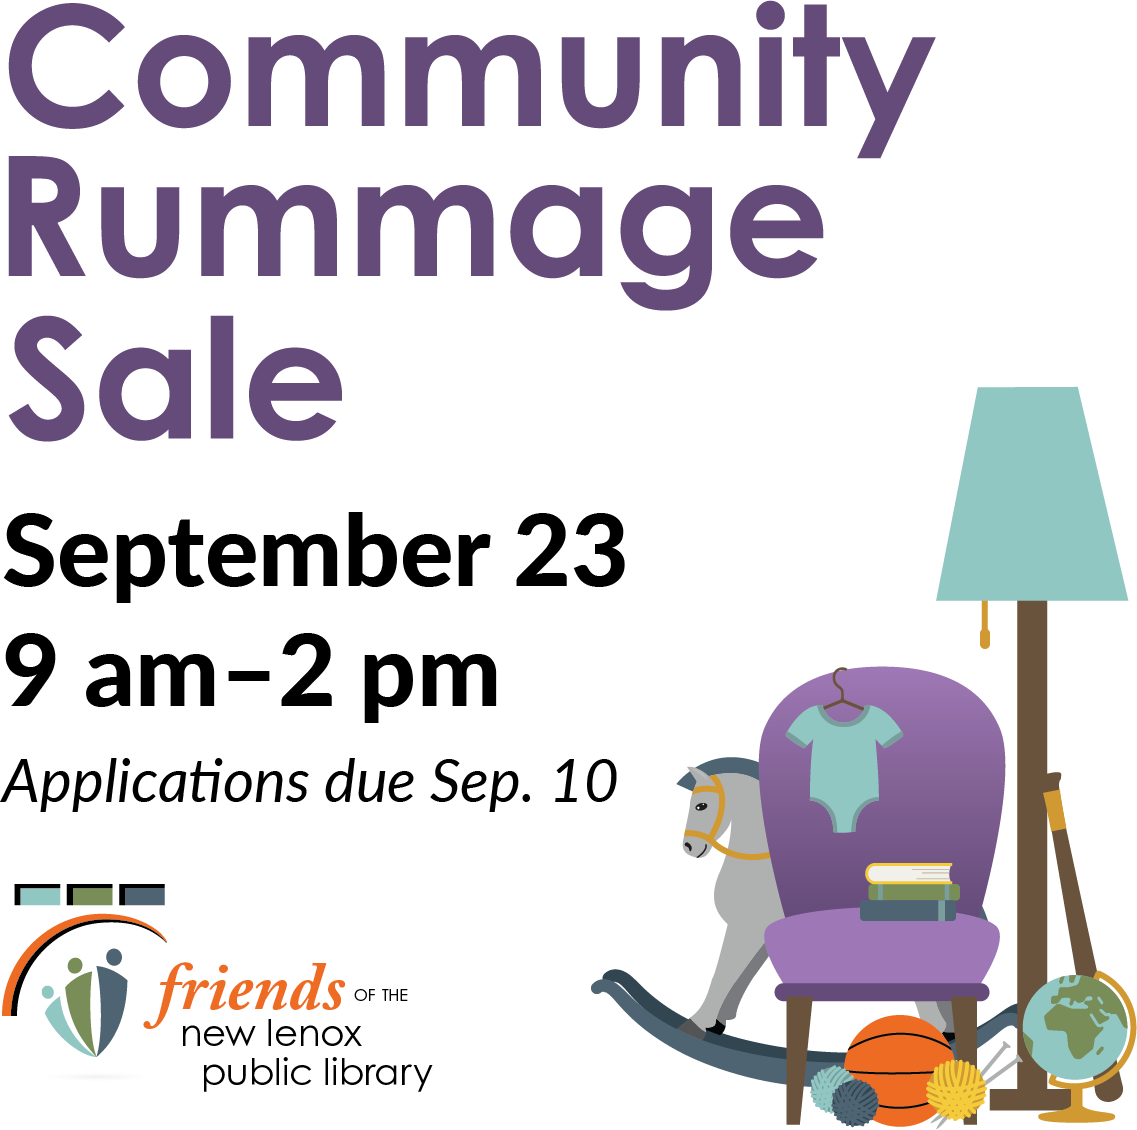 Community Rummage Sale dates with Friends logo and graphics (rocking horse, chair, basketball, lamp and other objects)